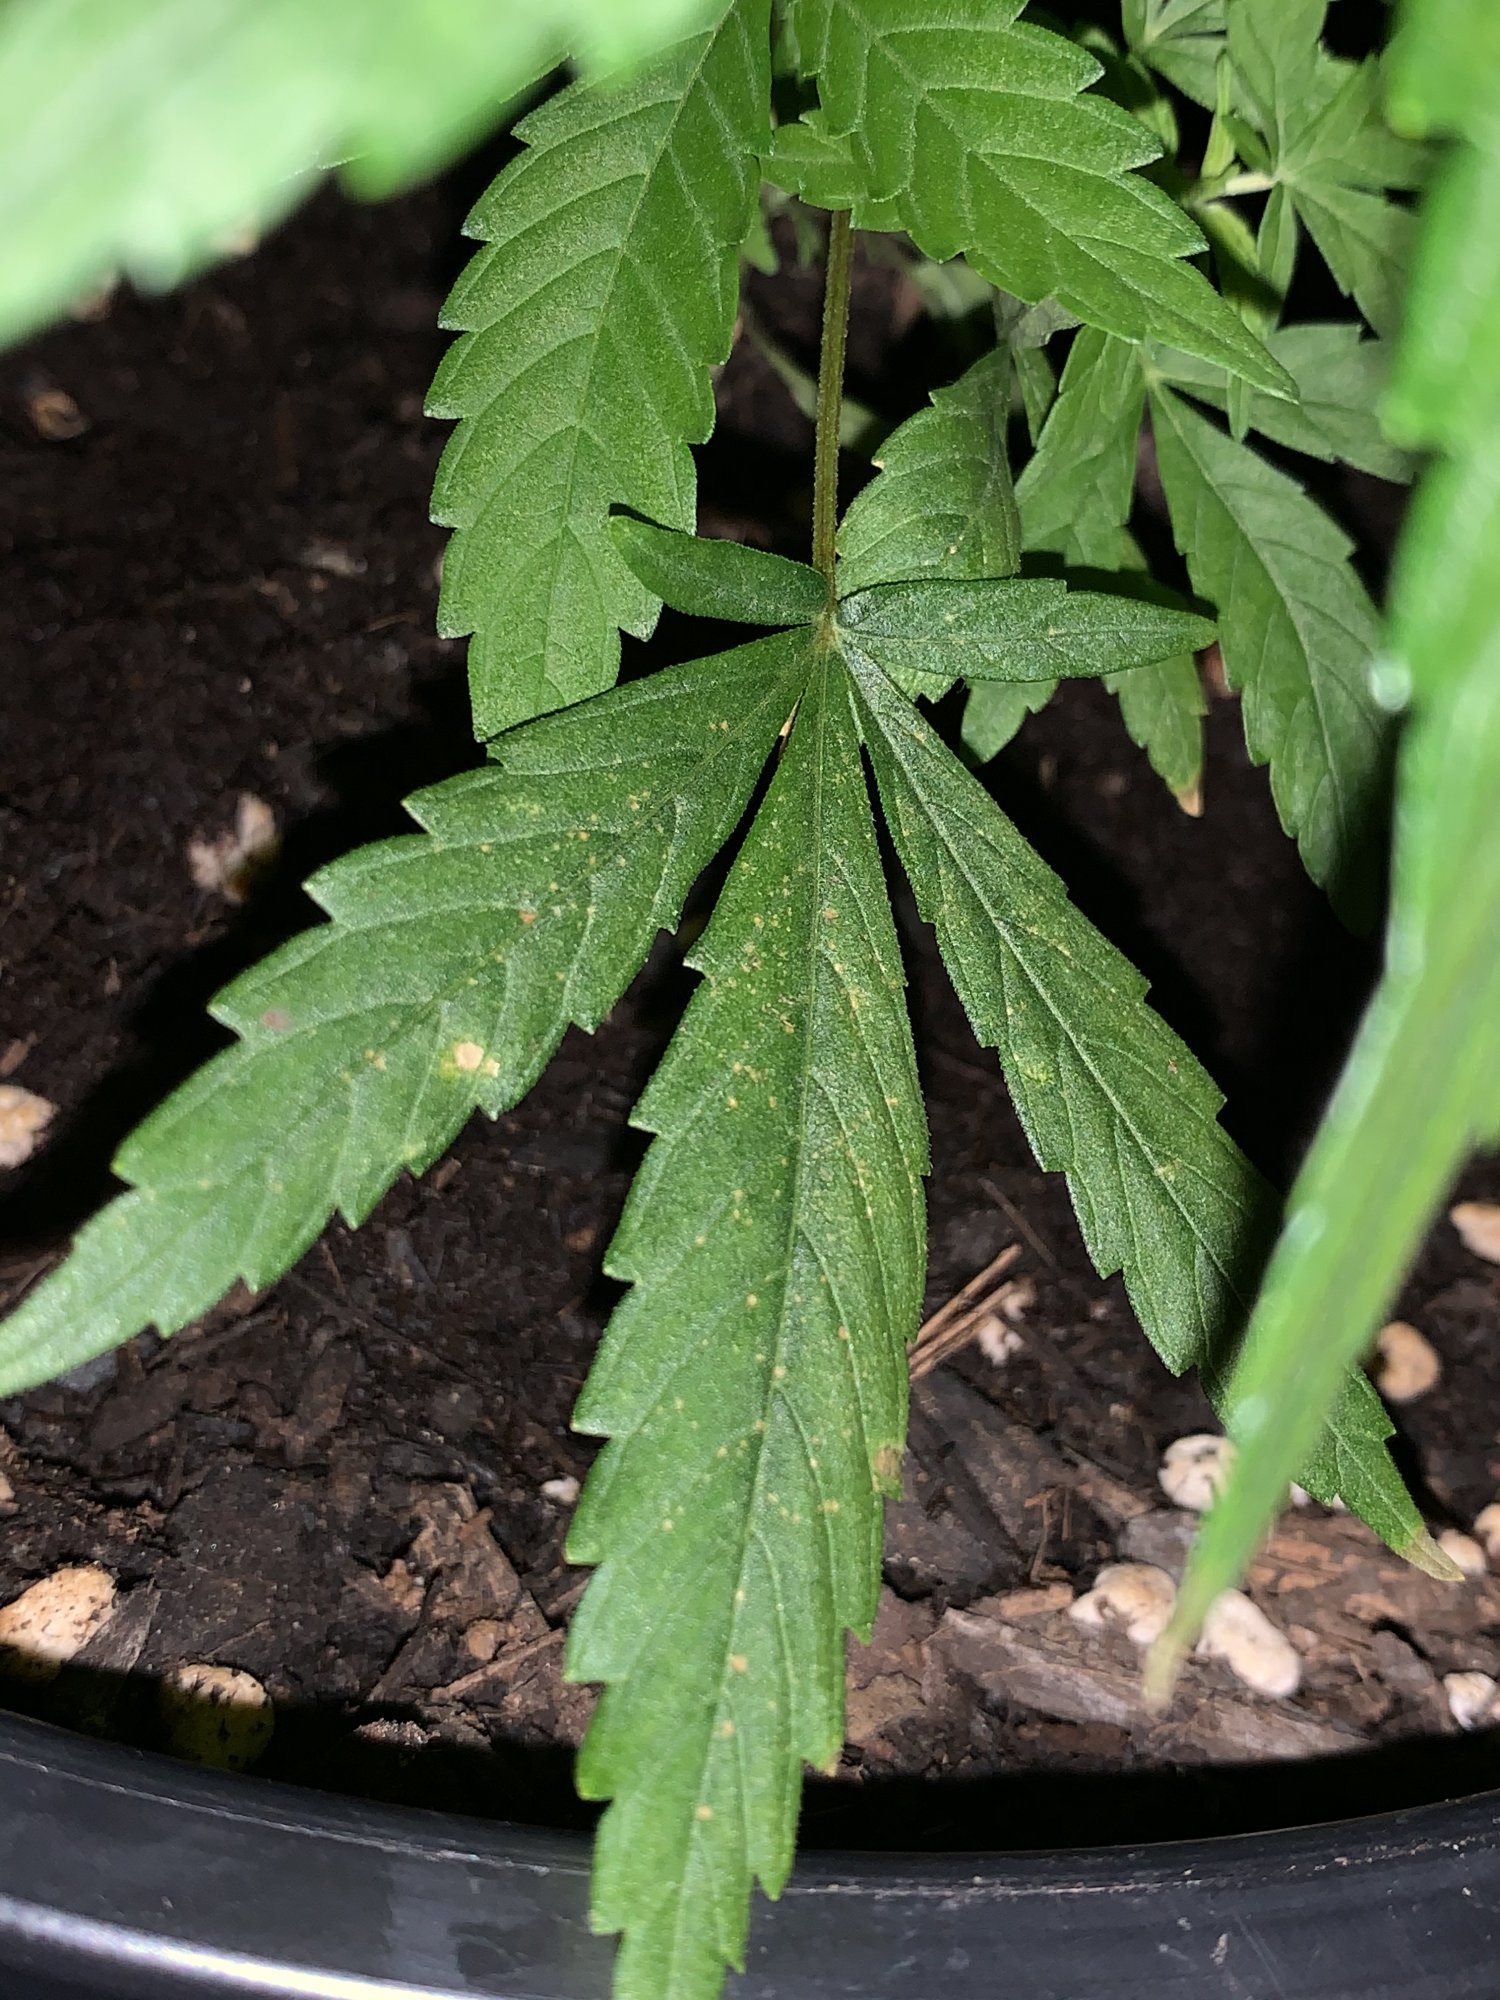 Whitebrown dots on my fan leaves please help its my first time growing and i dont want it to 